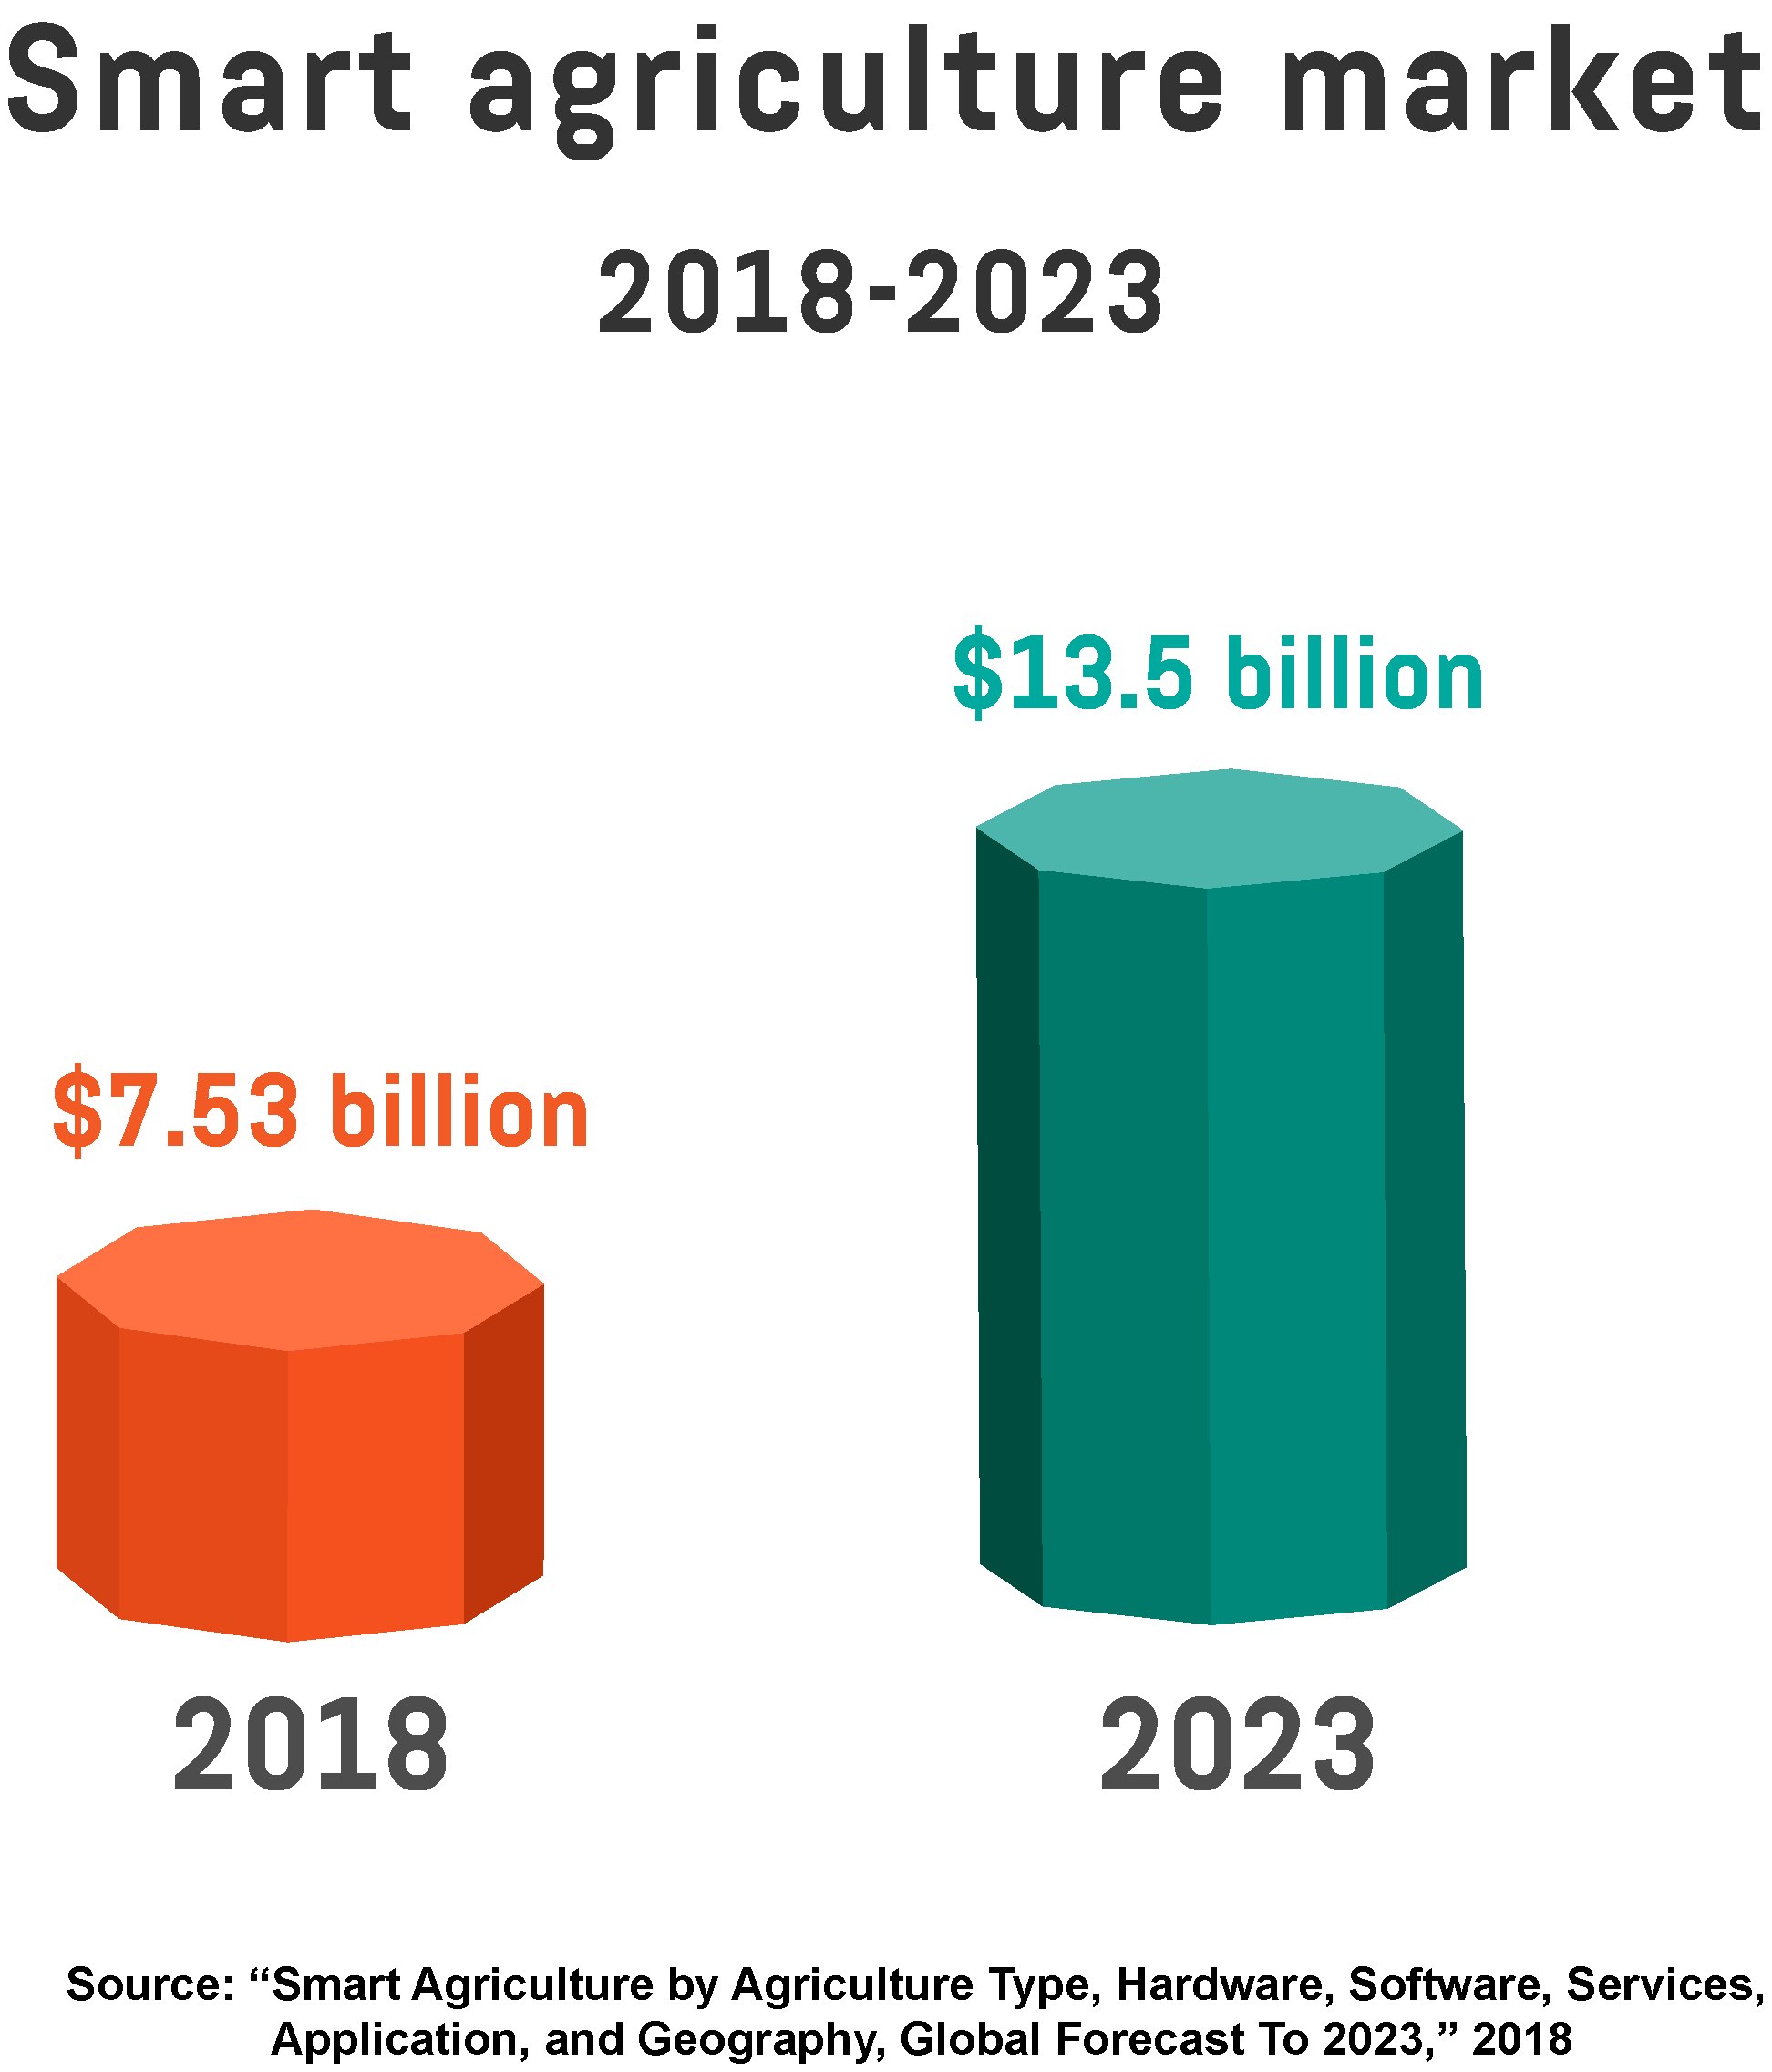 Bar graph showing the value of the smart agriculture market in 2018 and 2023.